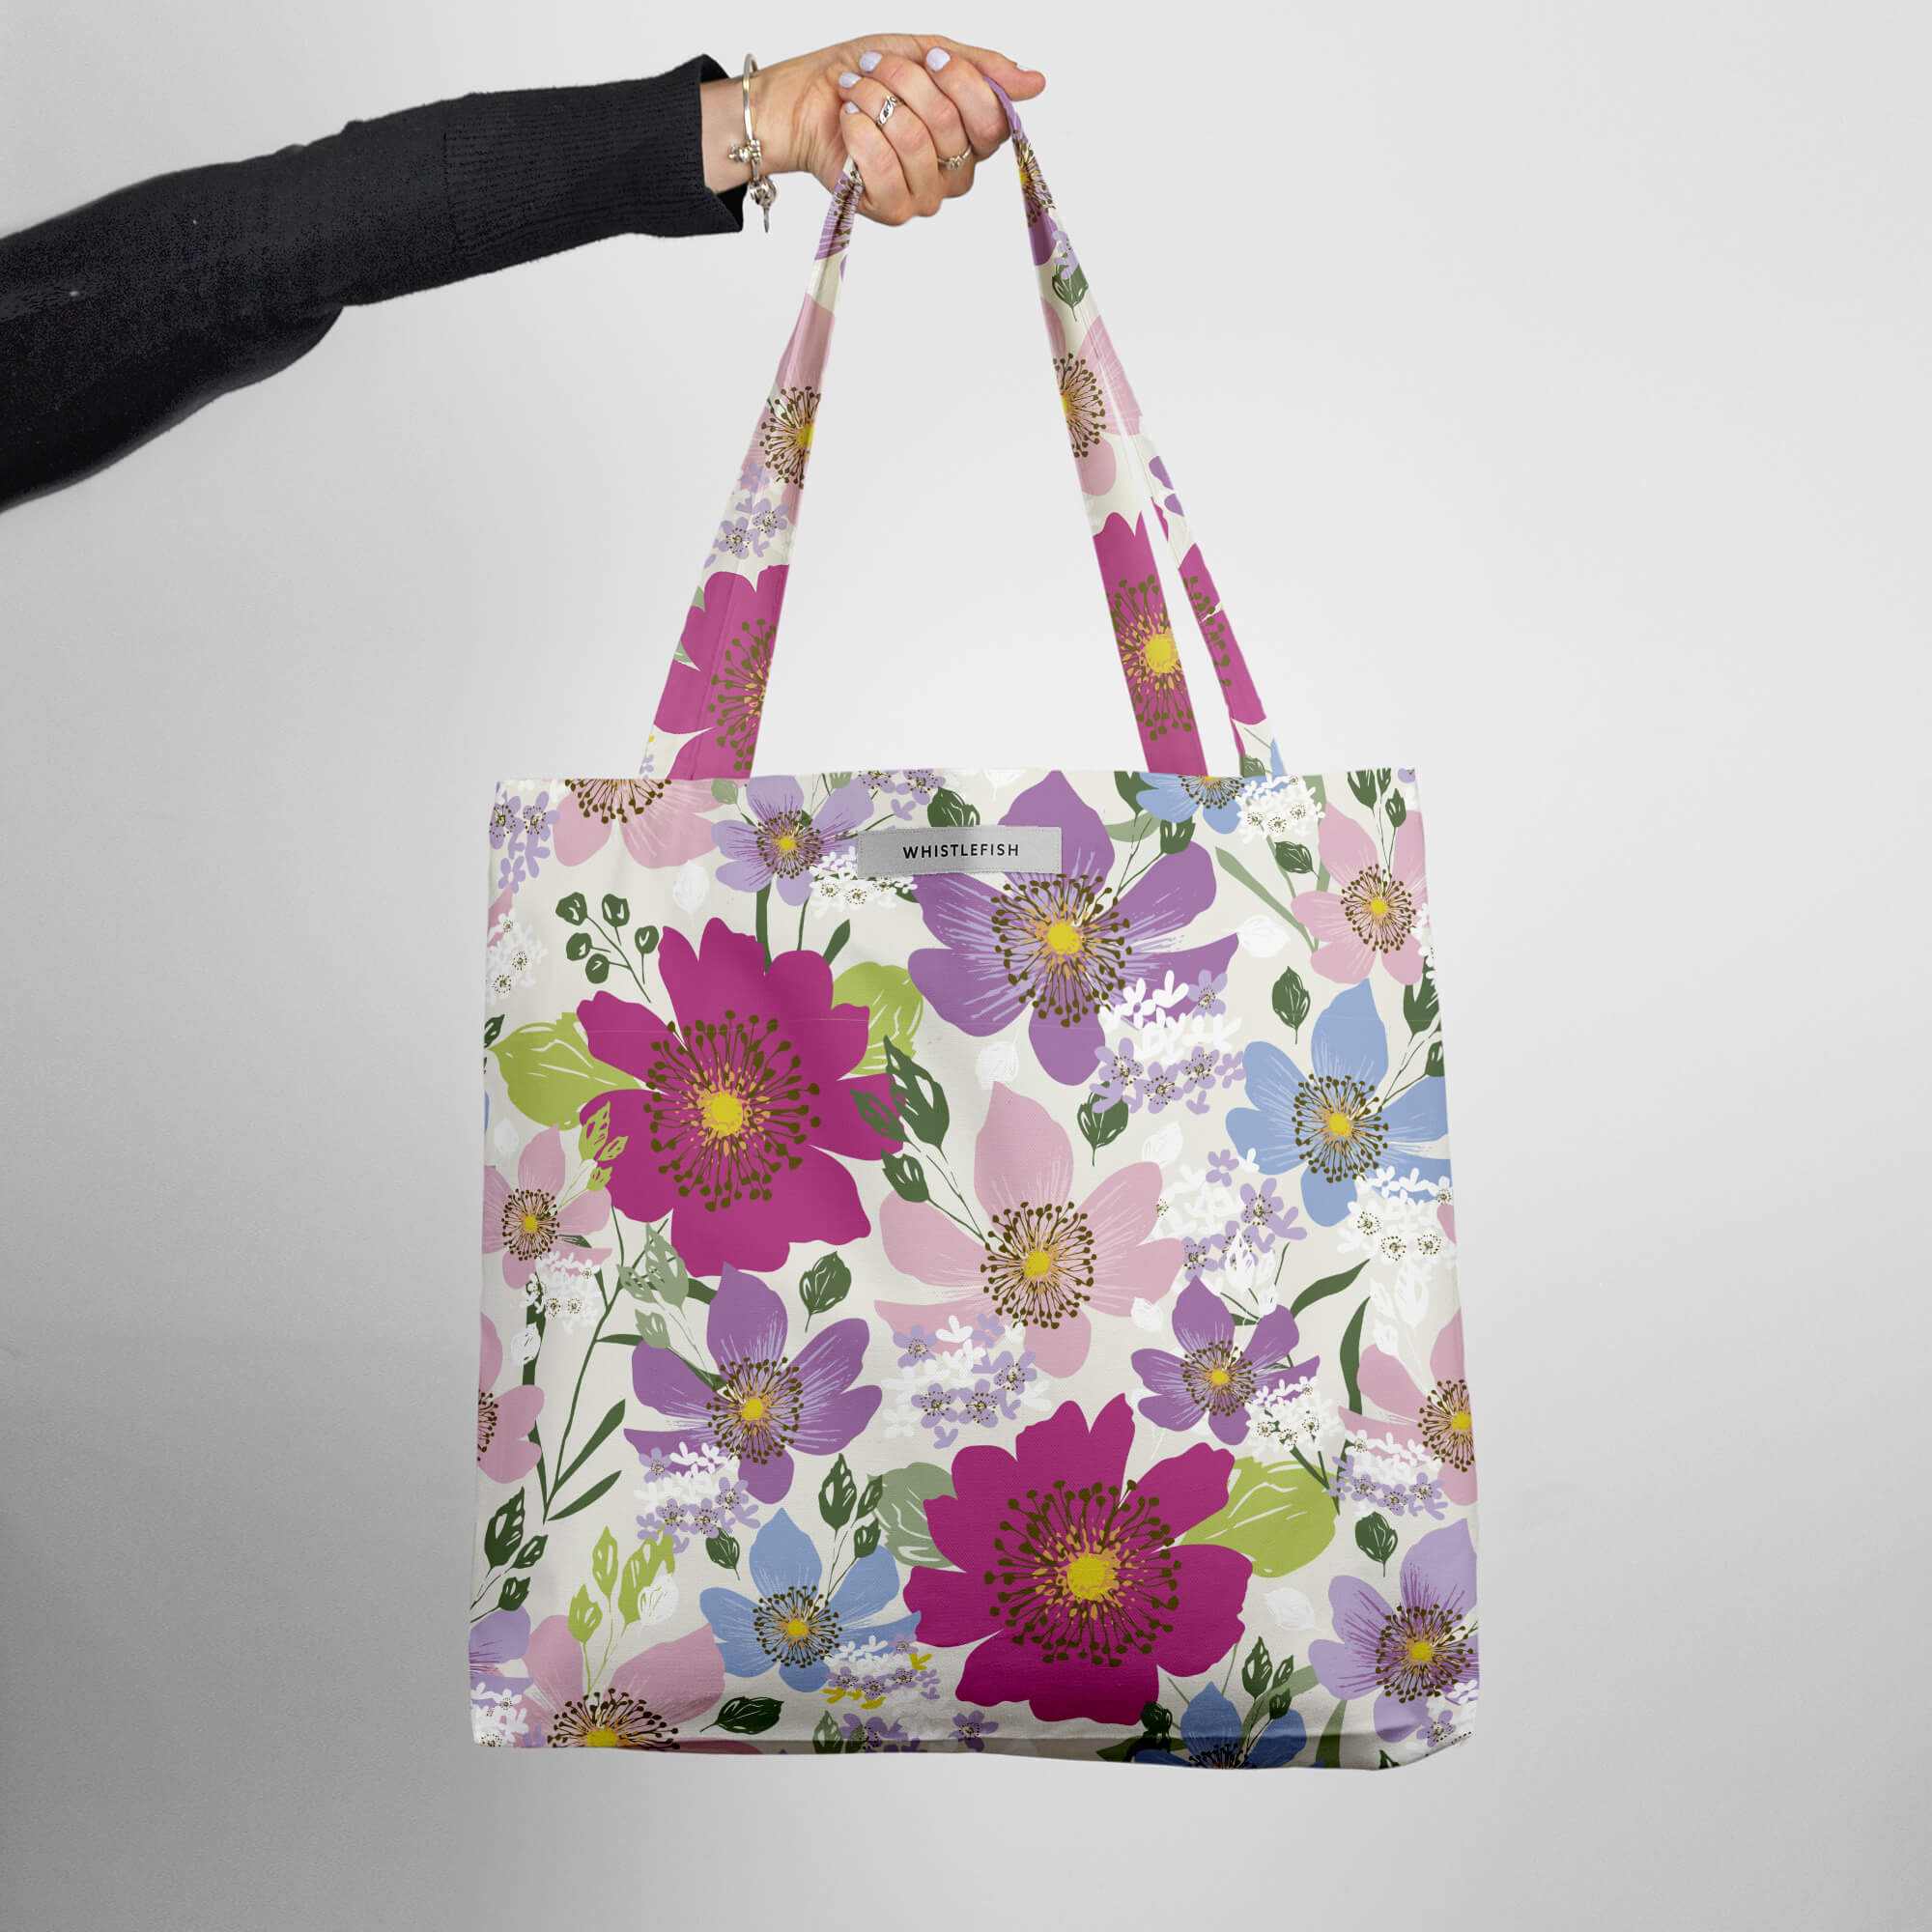 An image of Pink Floral Tote Bag Whistlefish